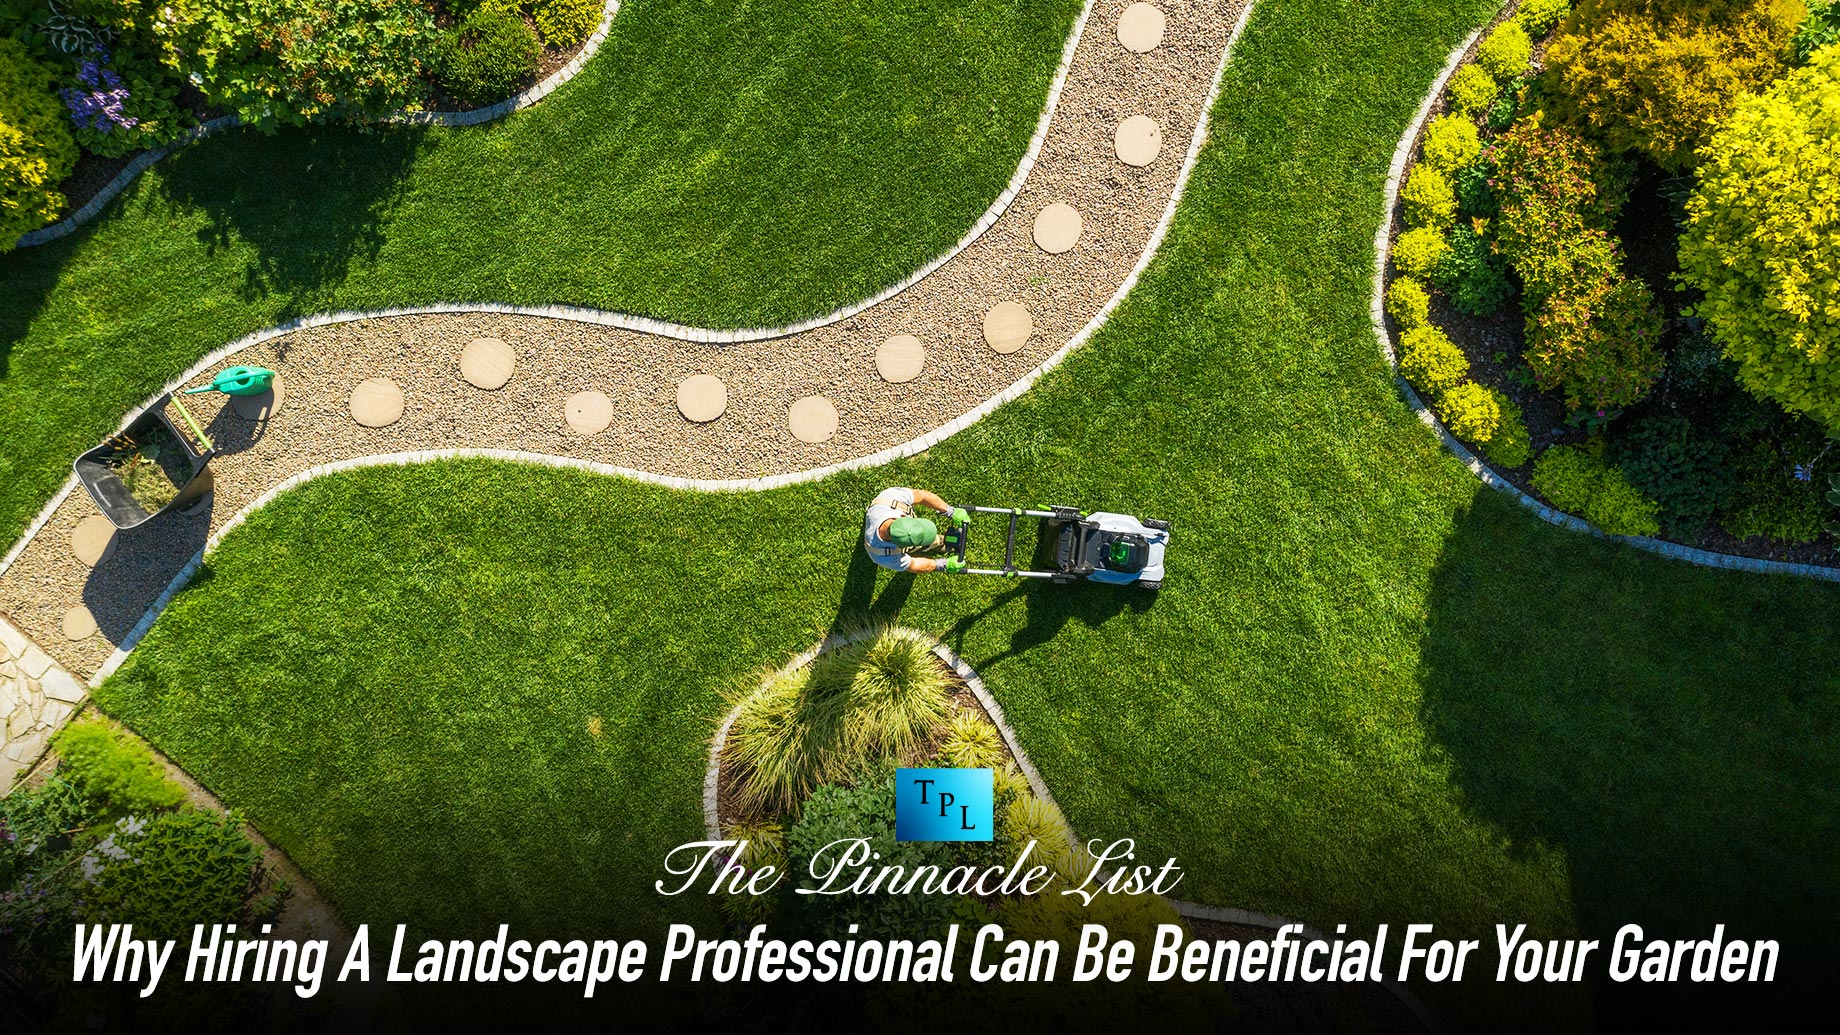 Why Hiring A Landscape Professional Can Be Beneficial For Your Garden